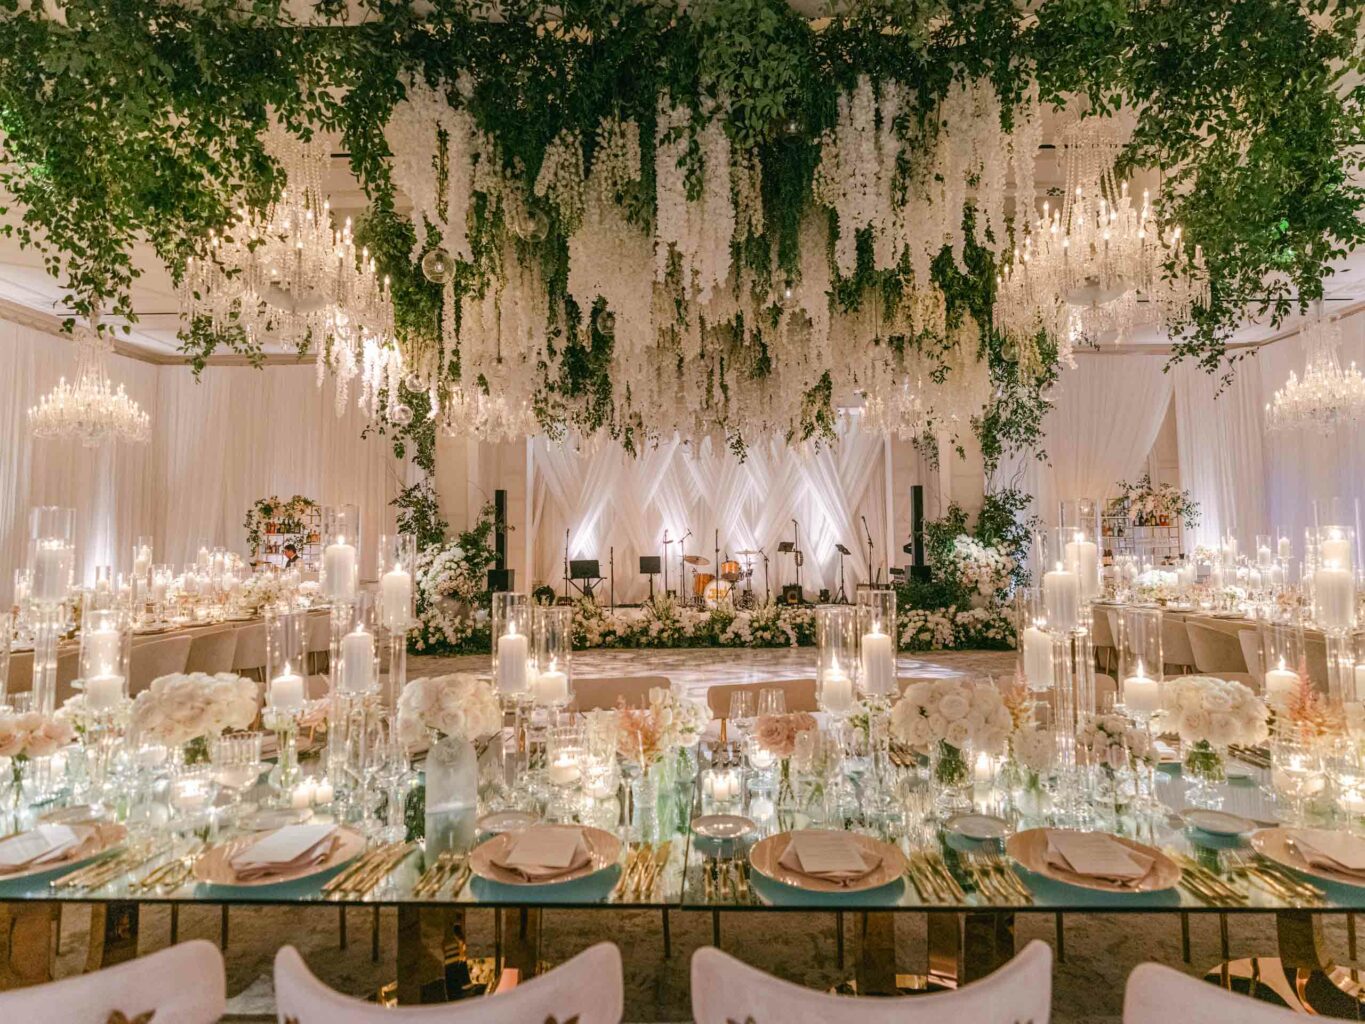 elegantly decorated dining tables with candles and floral centerpieces in a reception hall.